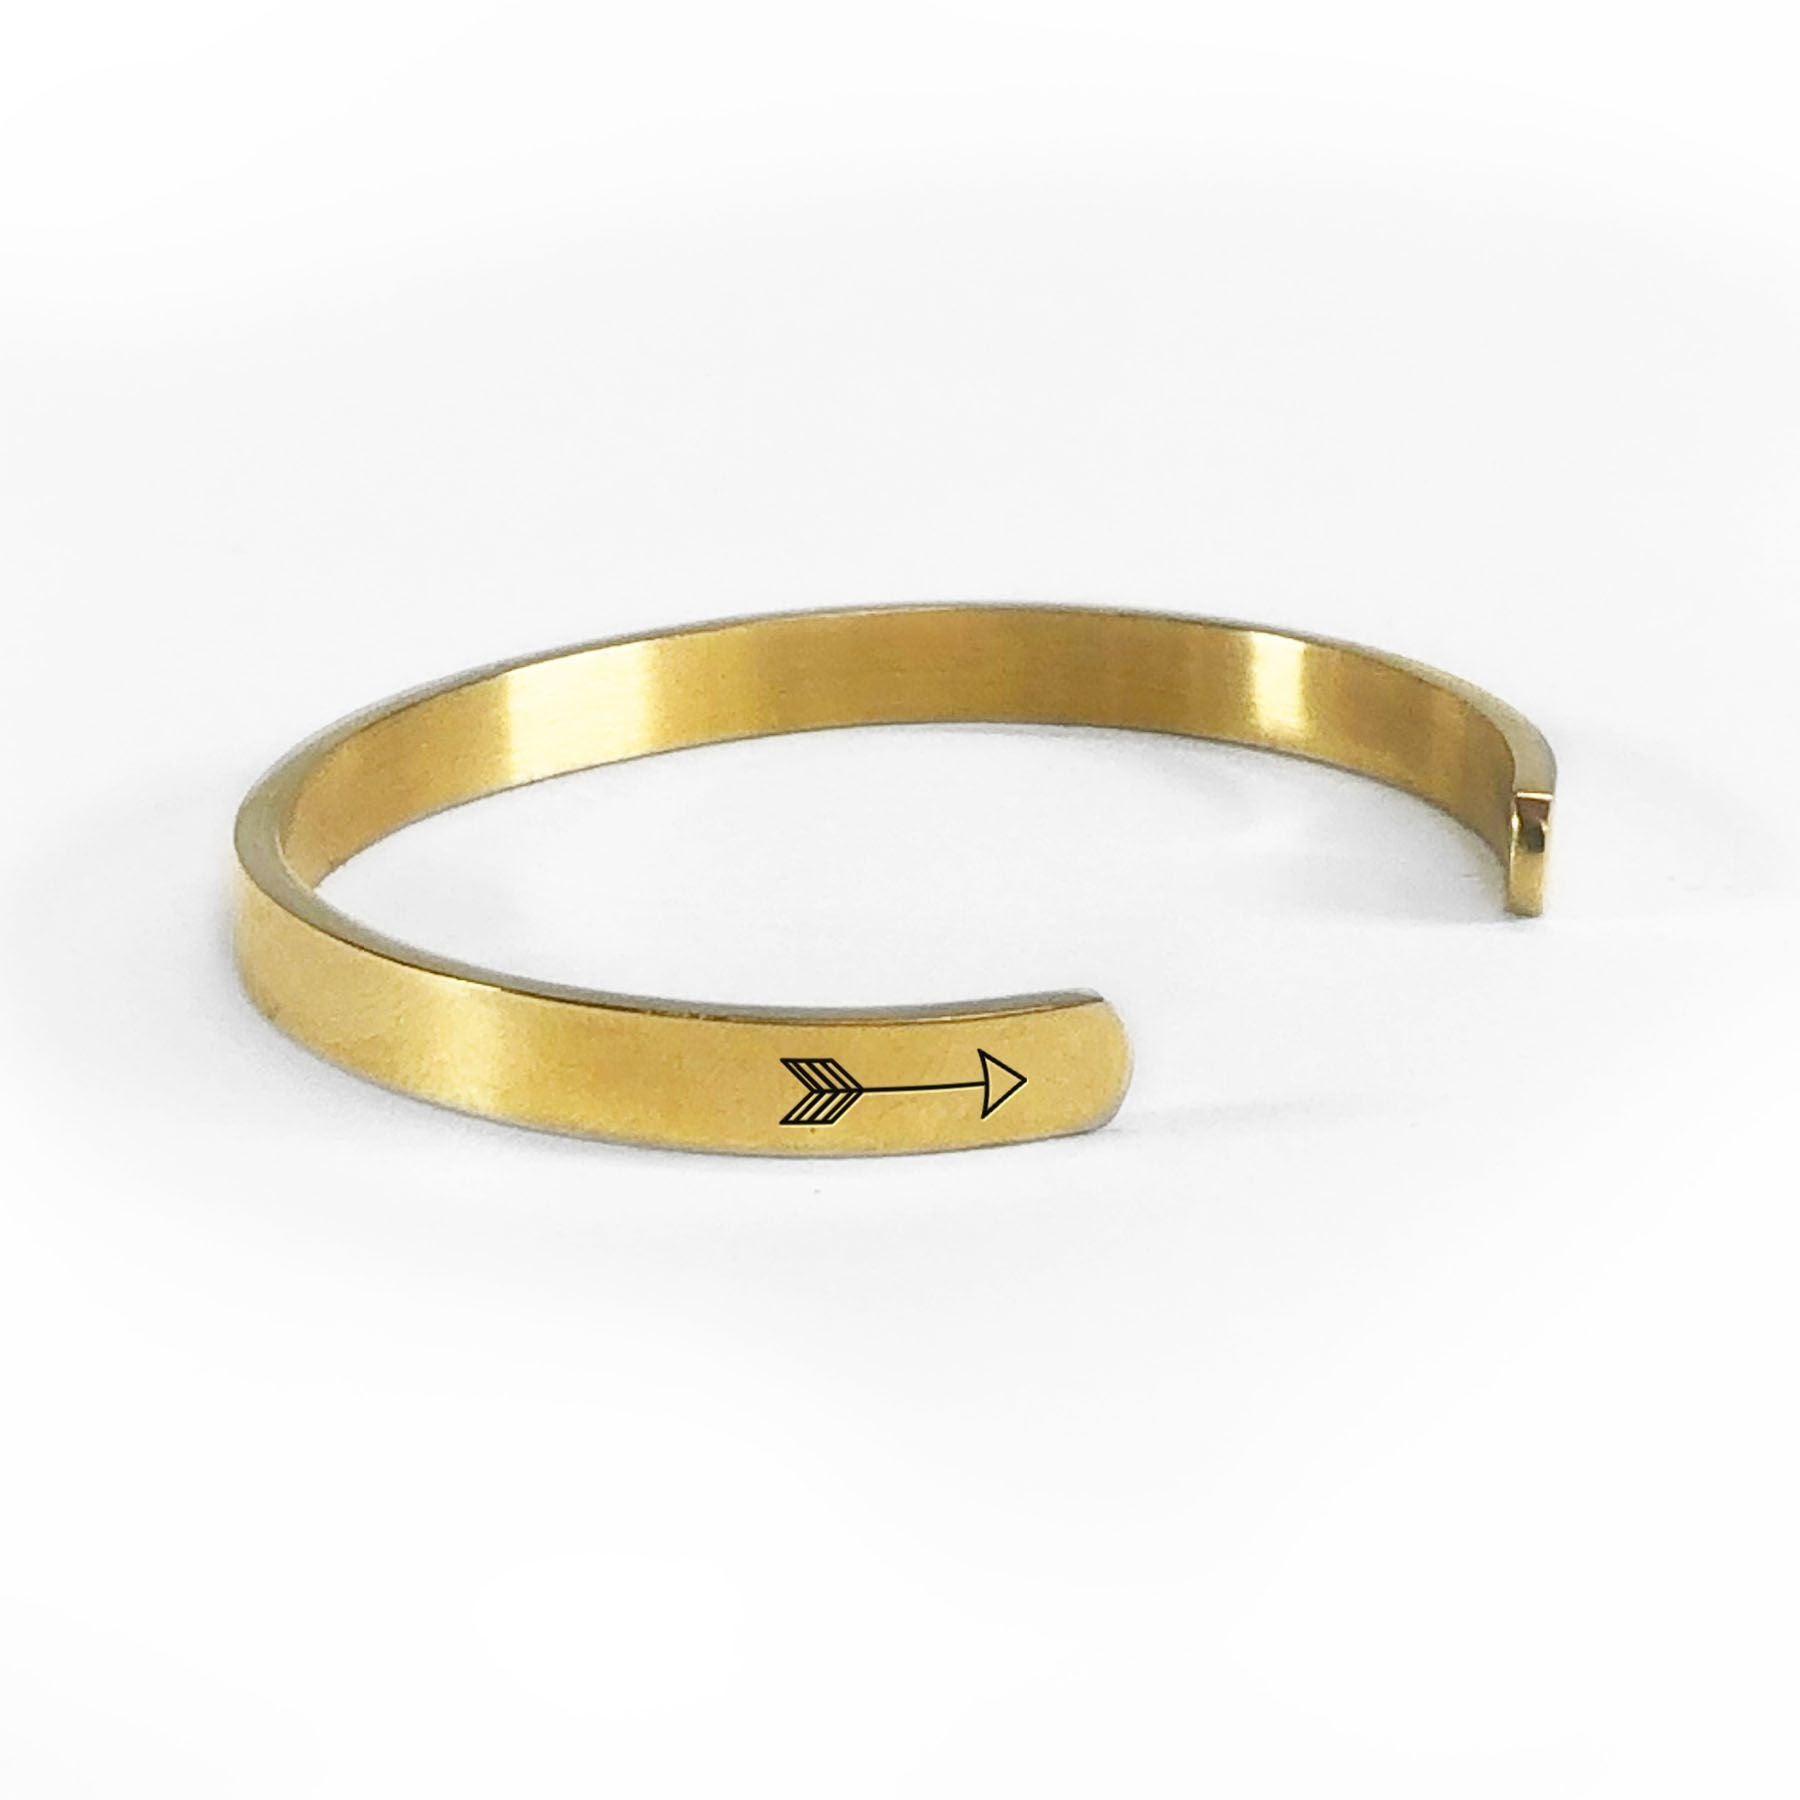 Ohana bracelet in gold rotated to show arrows and cuff opening